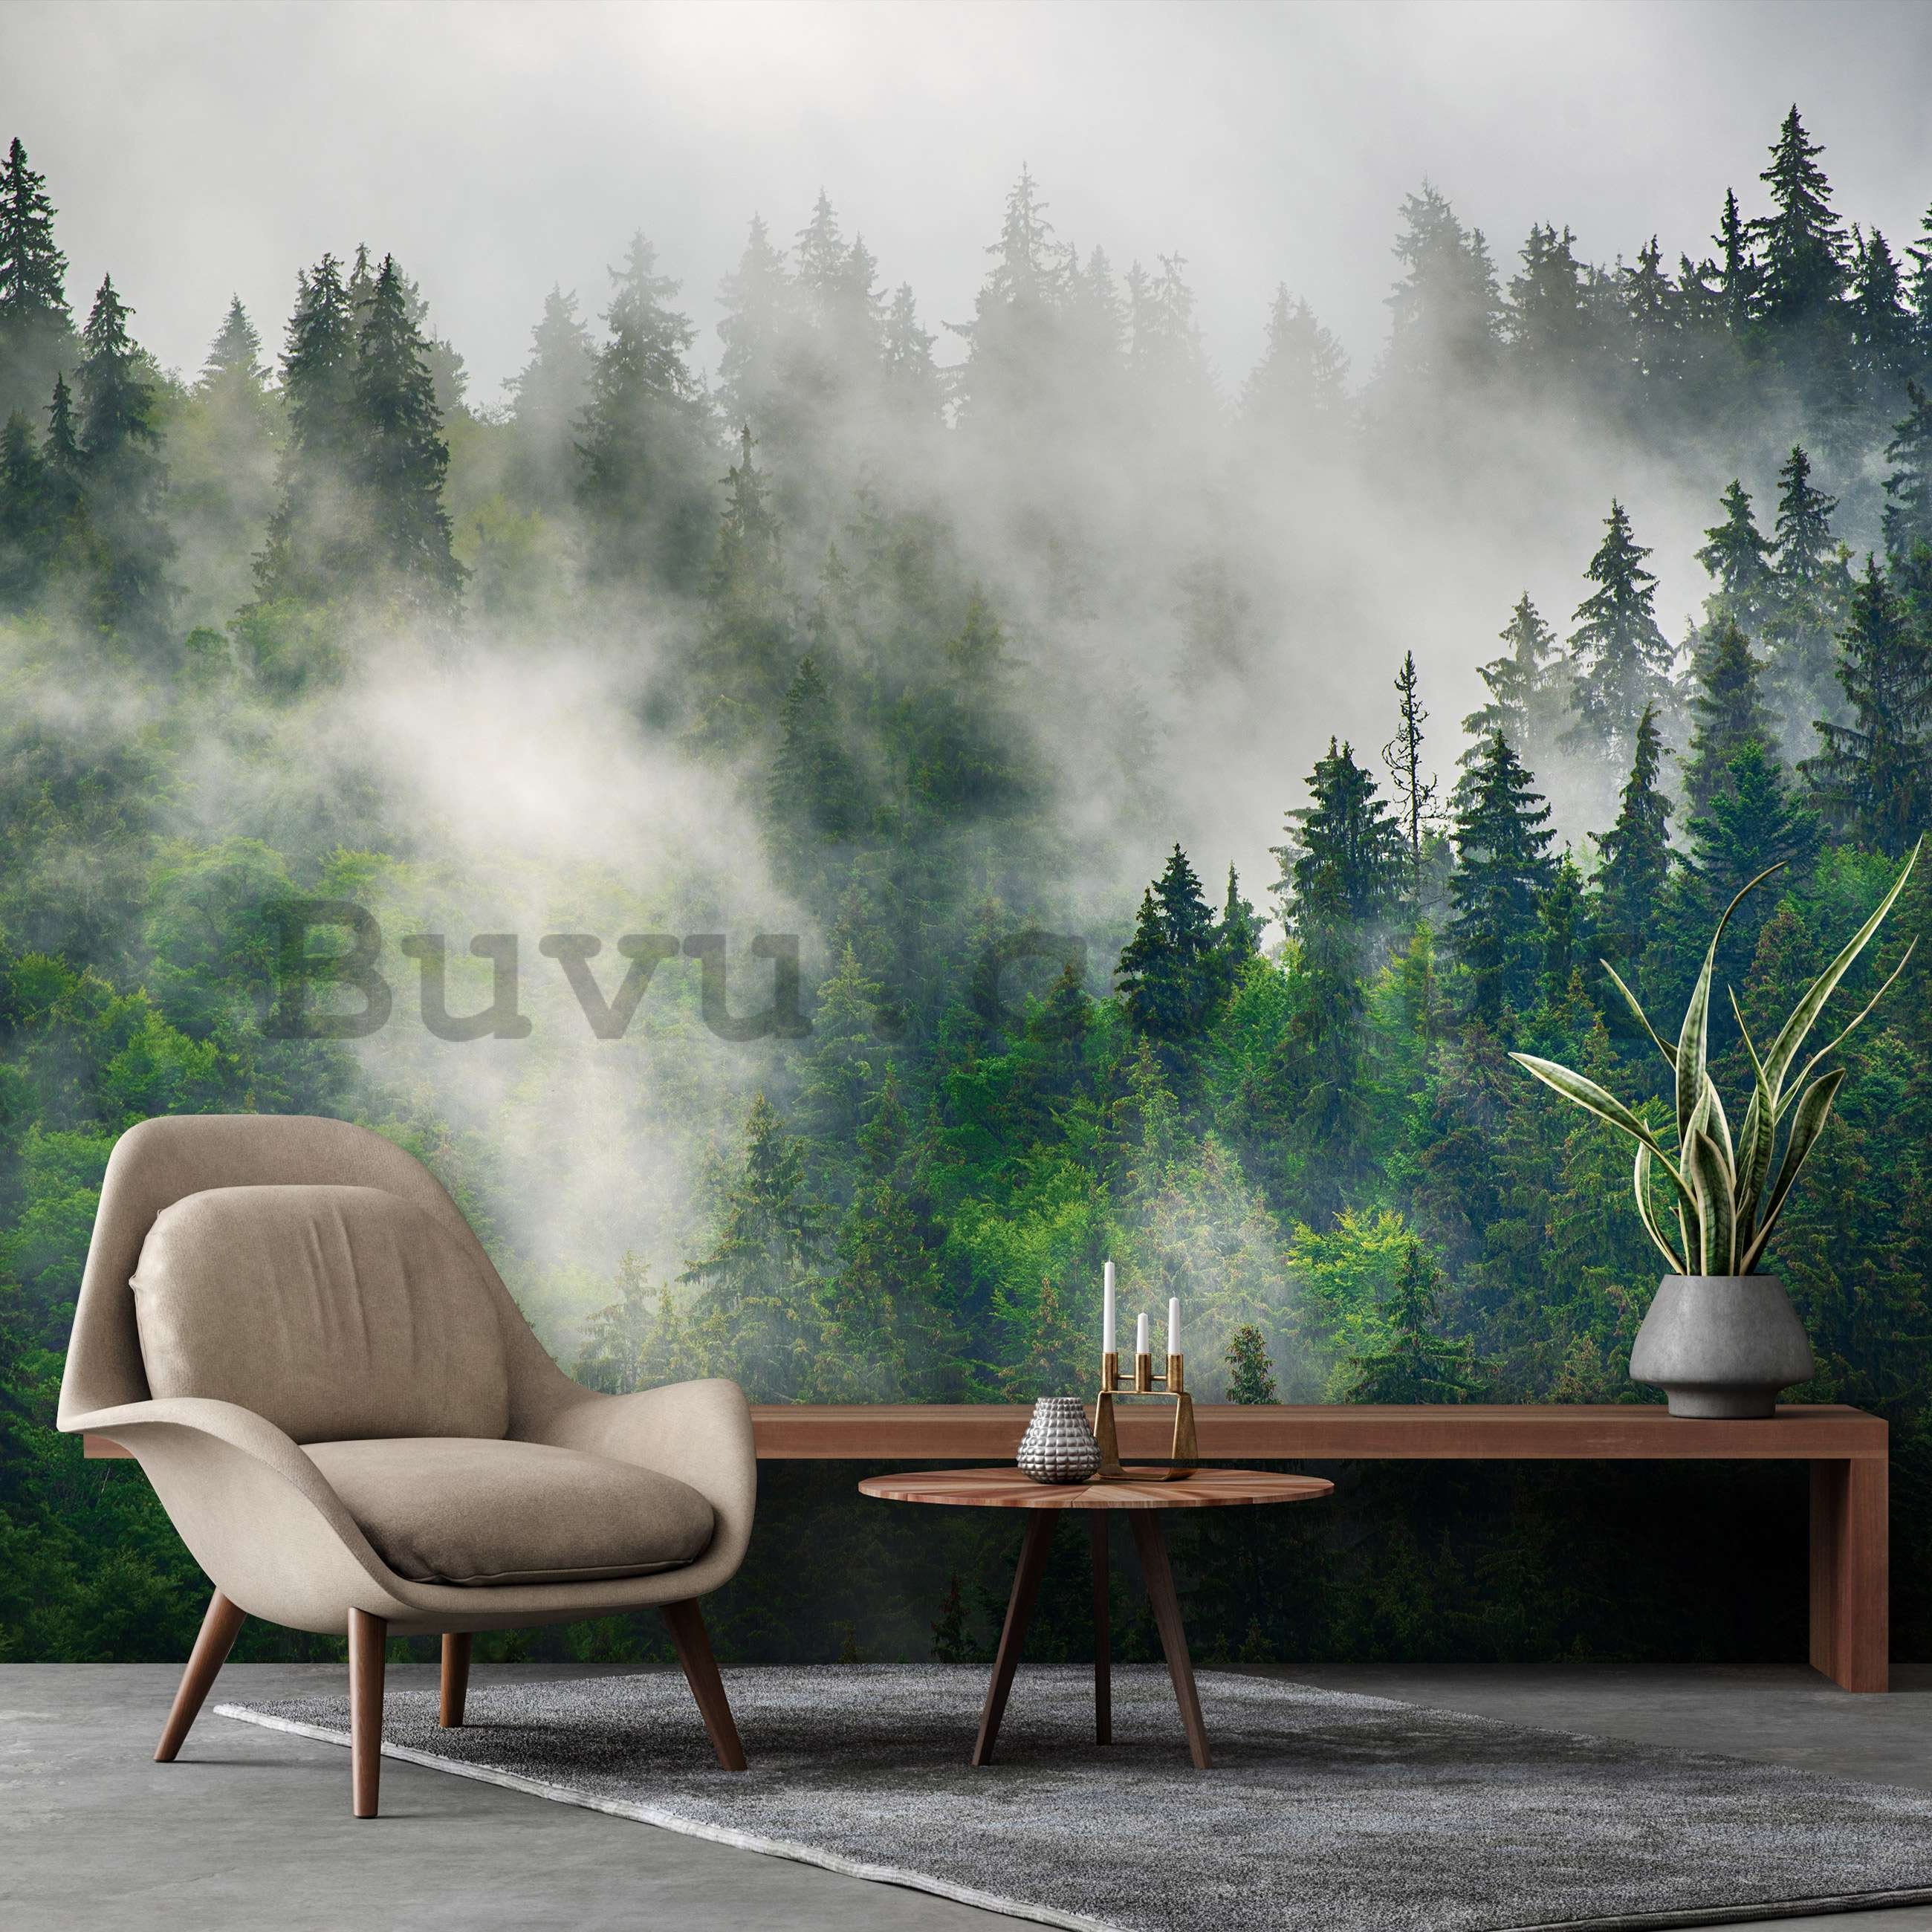 Wall mural vlies: Fog over the forest (5) - 416x254 cm